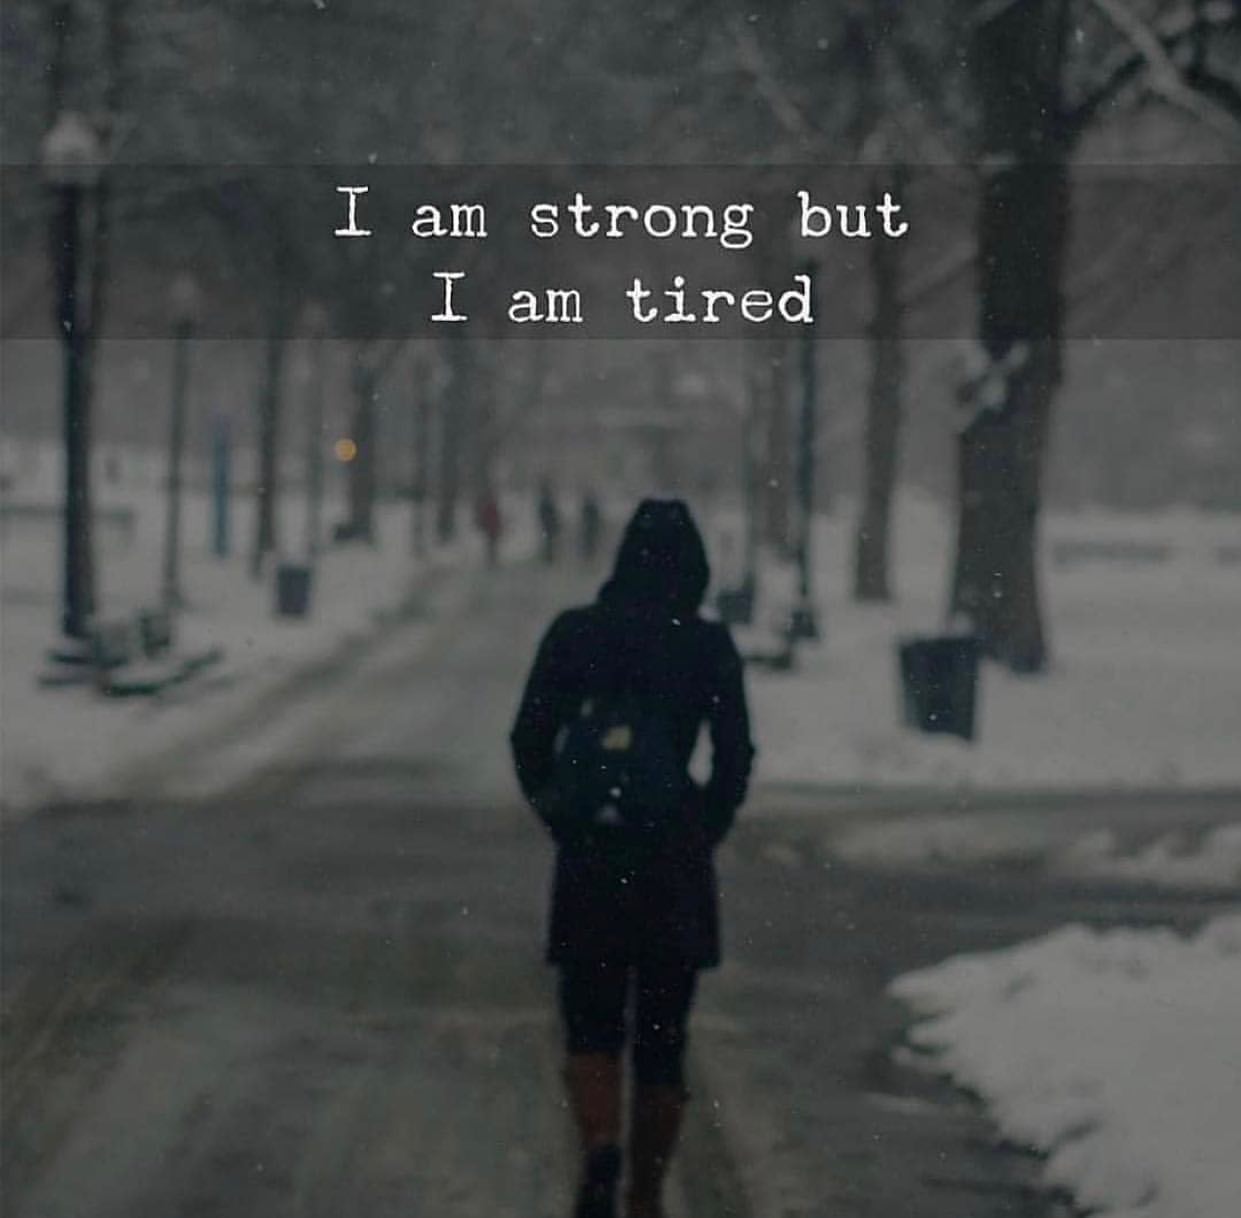 I am strong but I am tired.